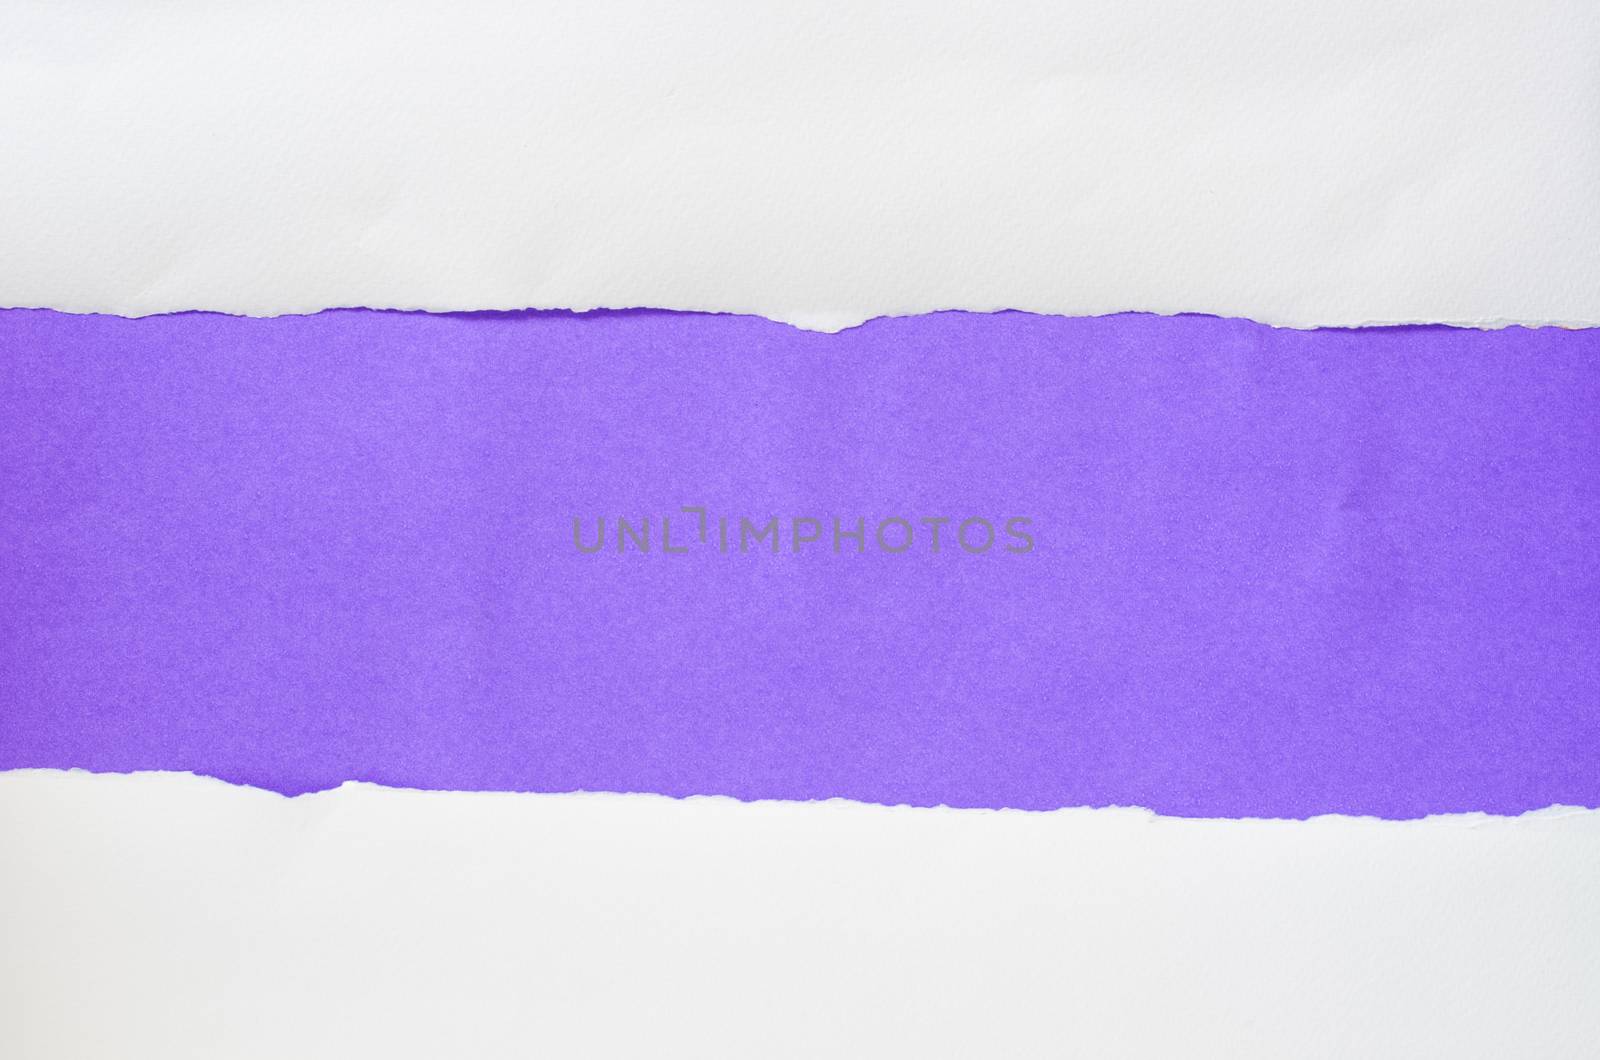 The paper is torn on a purple background and there is a cutoff to the free space for your text.